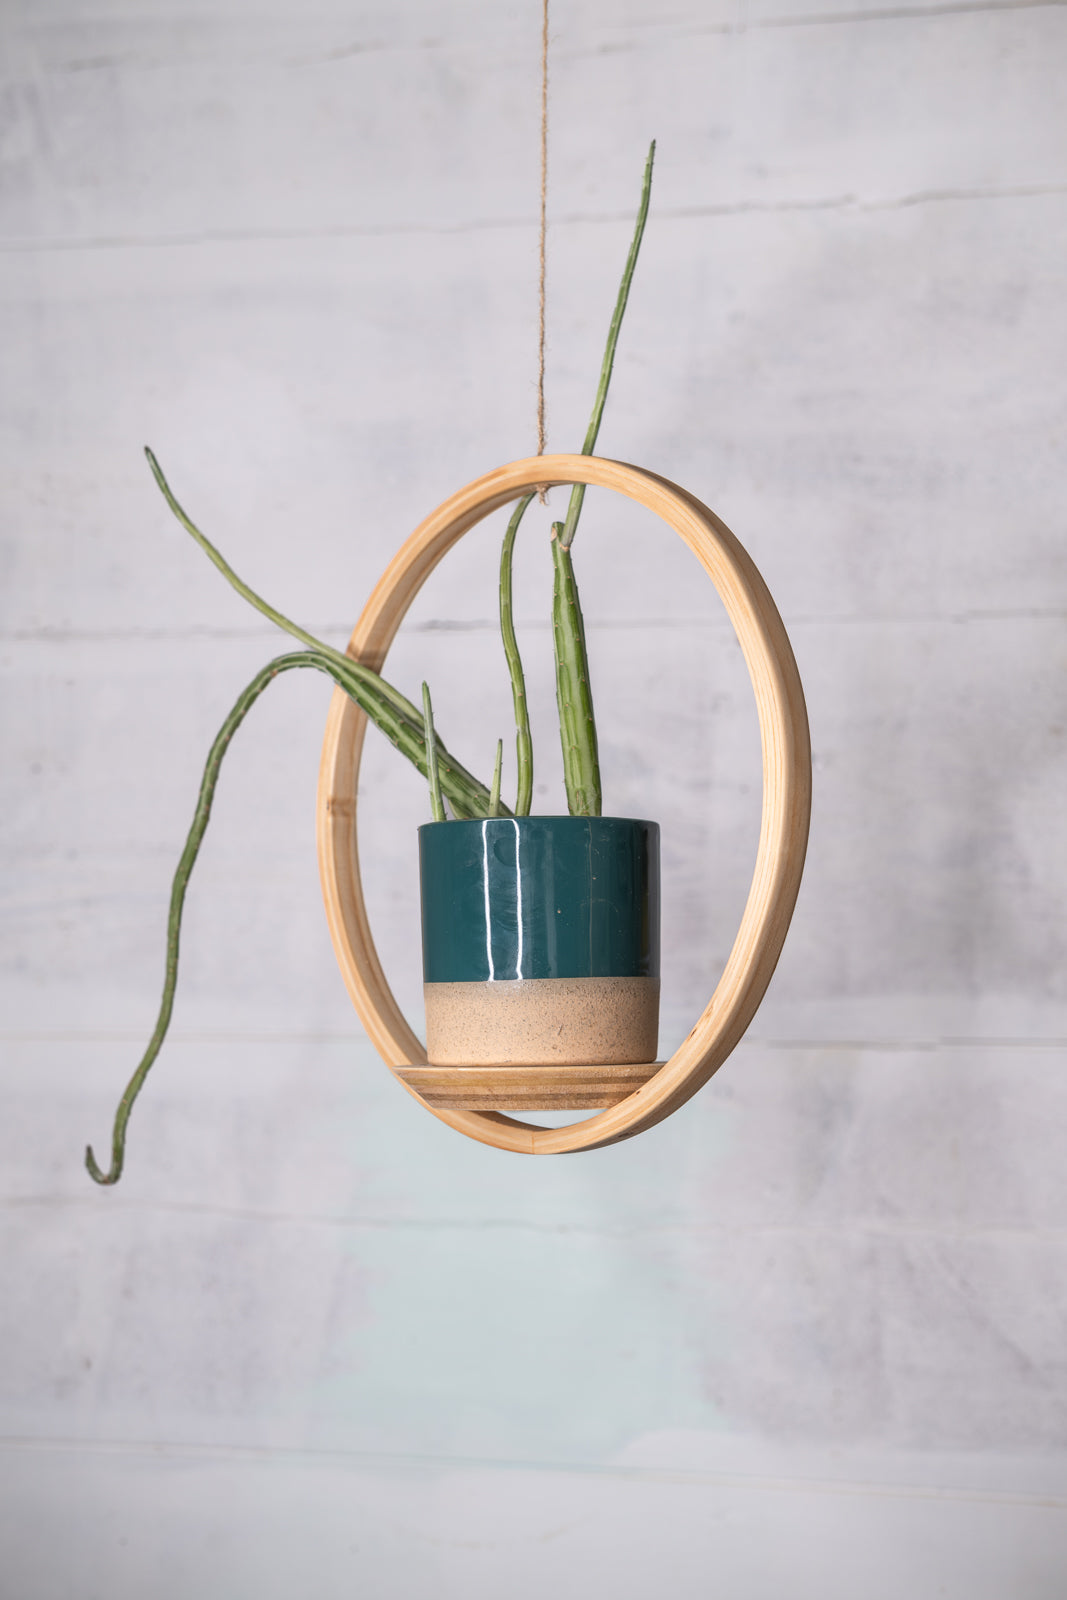 Small Circle Wooden Plant Hanger, Bubble Hanger, Planter With Saucer, Air Plant Hanger, Boho, Mid Century Modern Planter